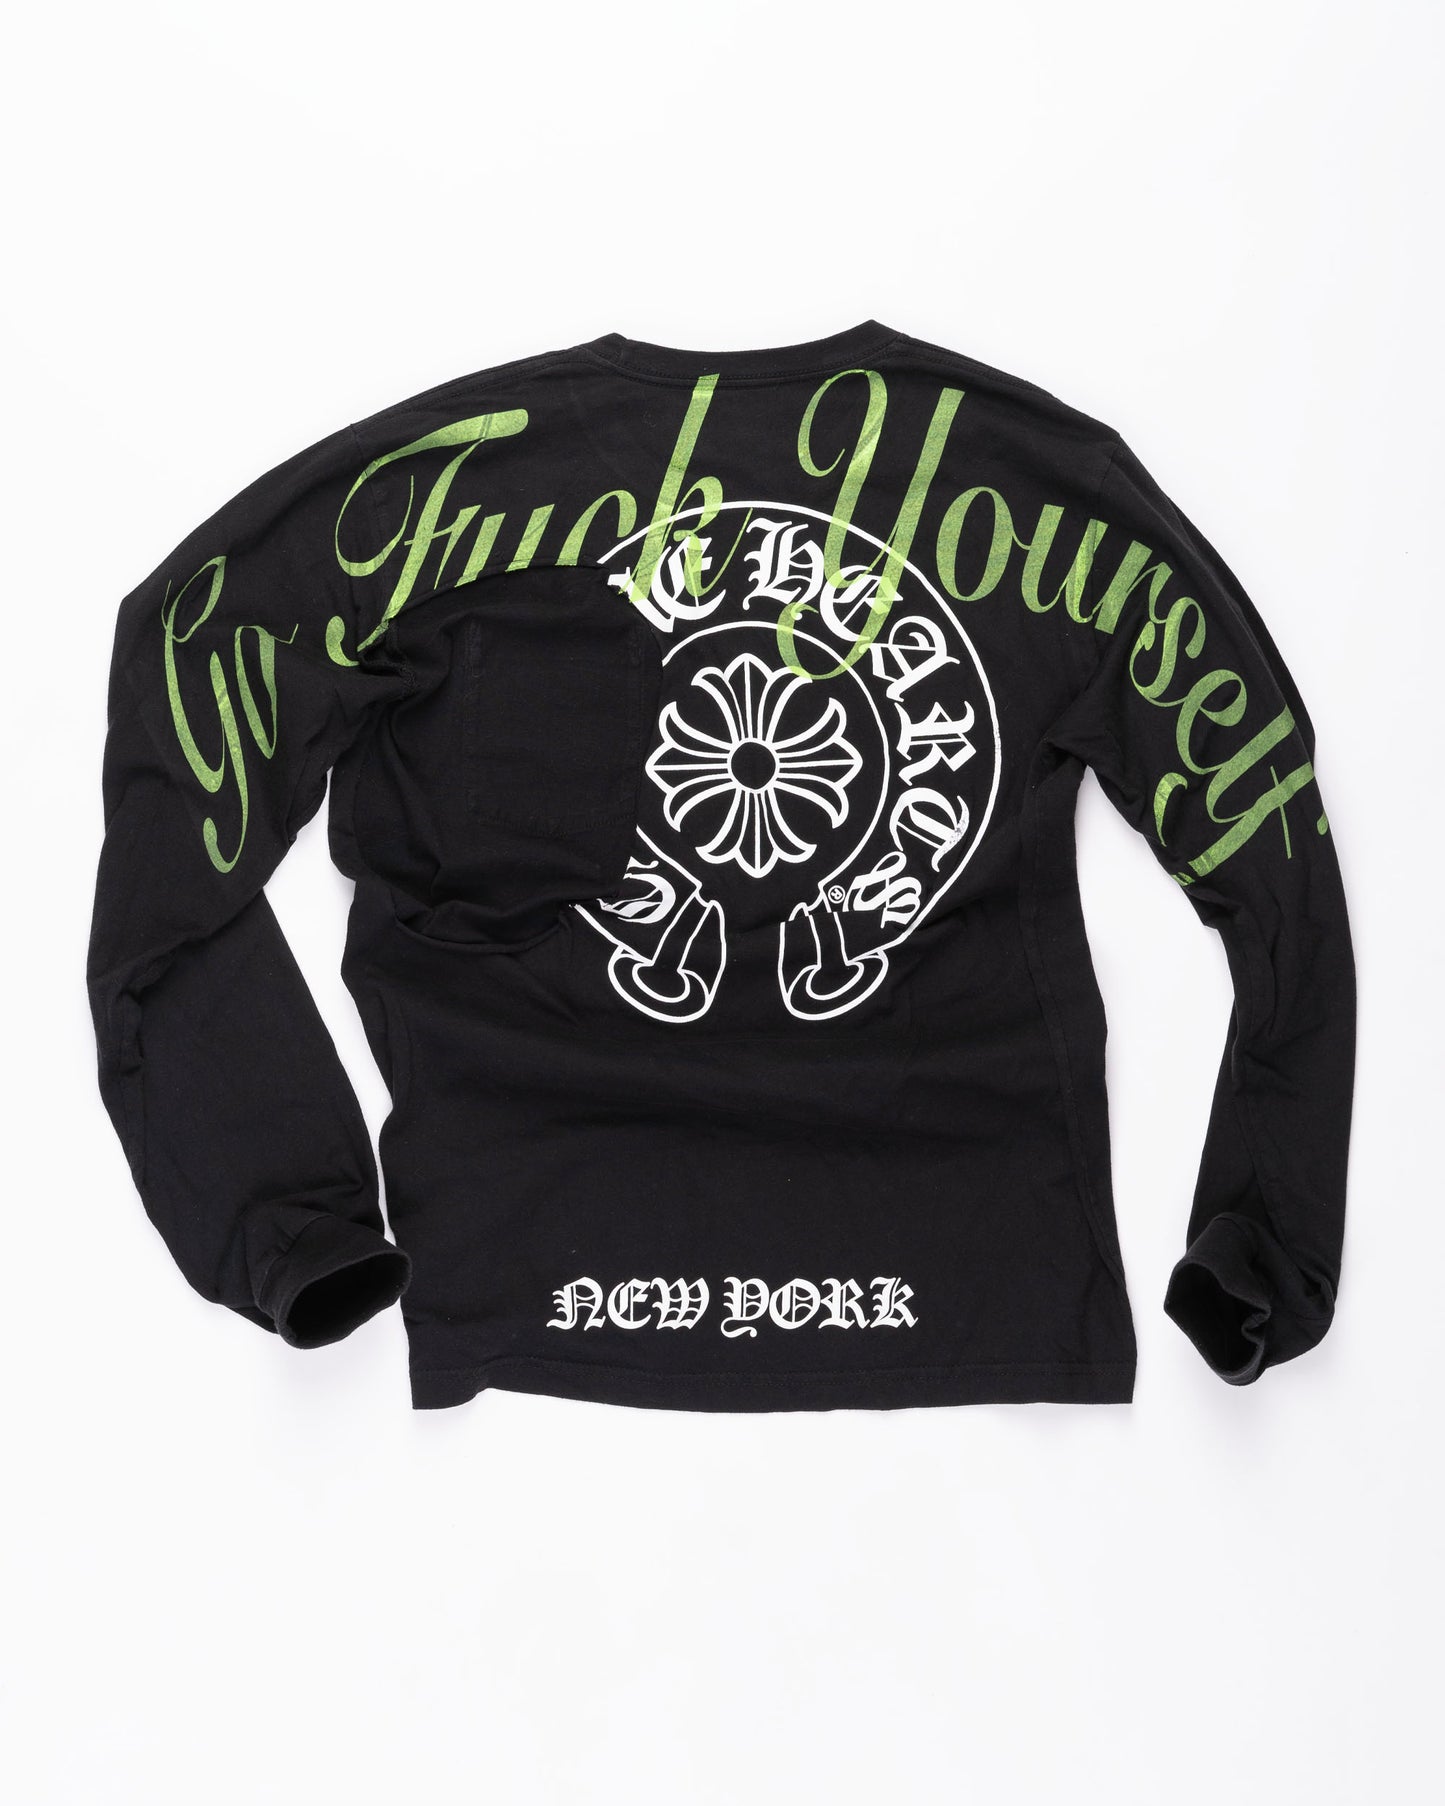 Ripped Chrome Hearts Long Sleeve Size: Large